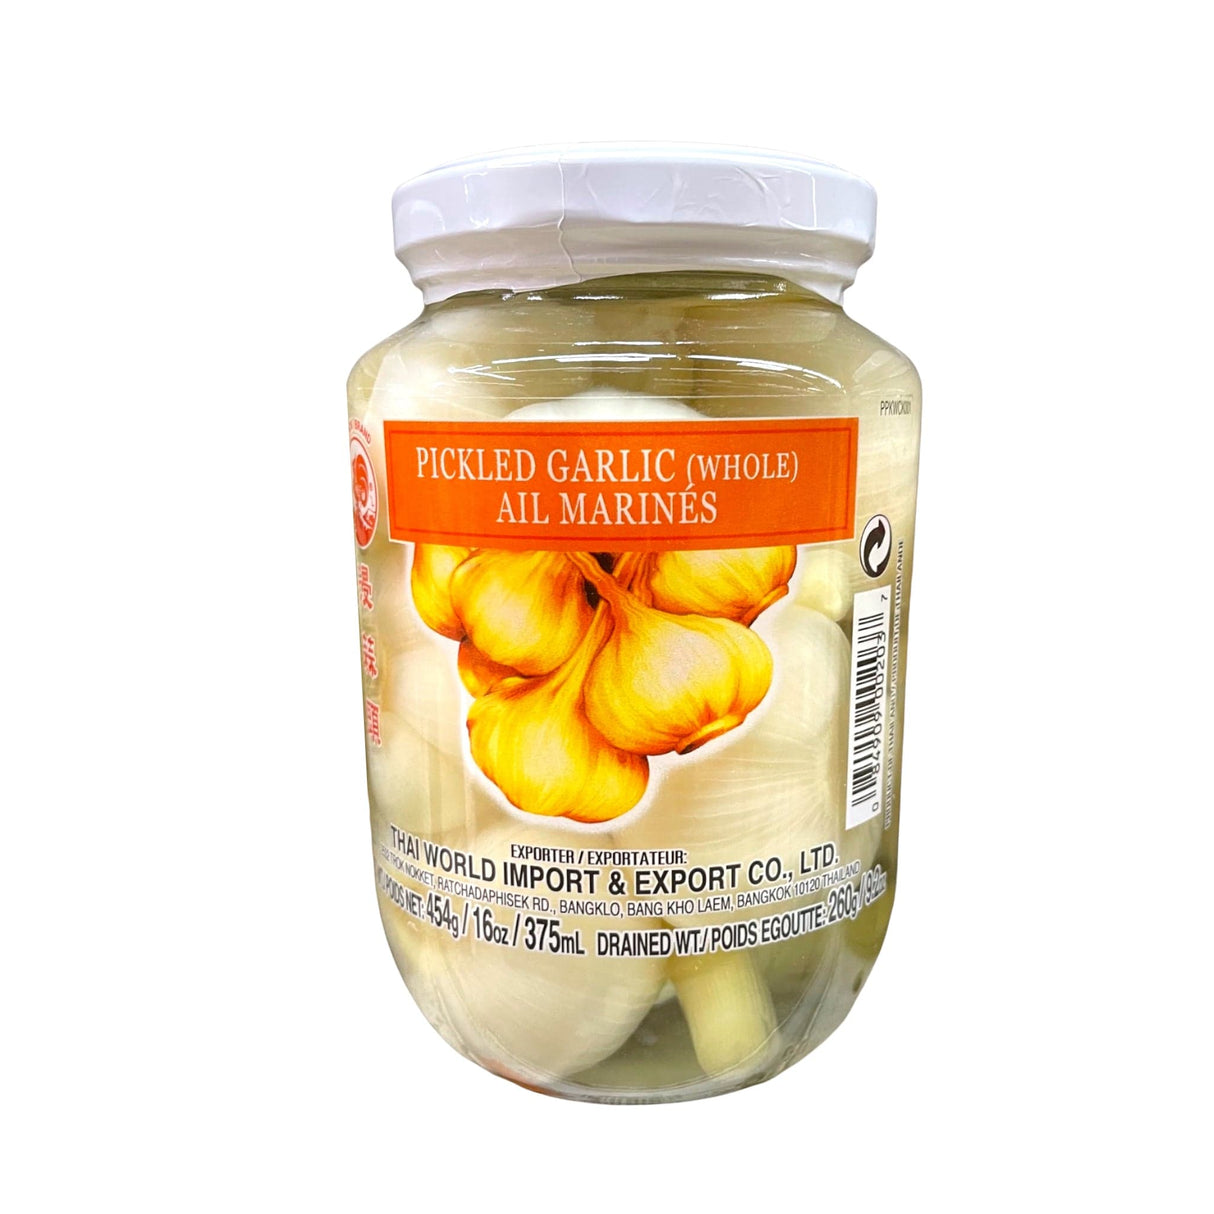 Cock Brand Pickled Garlic (Whole)